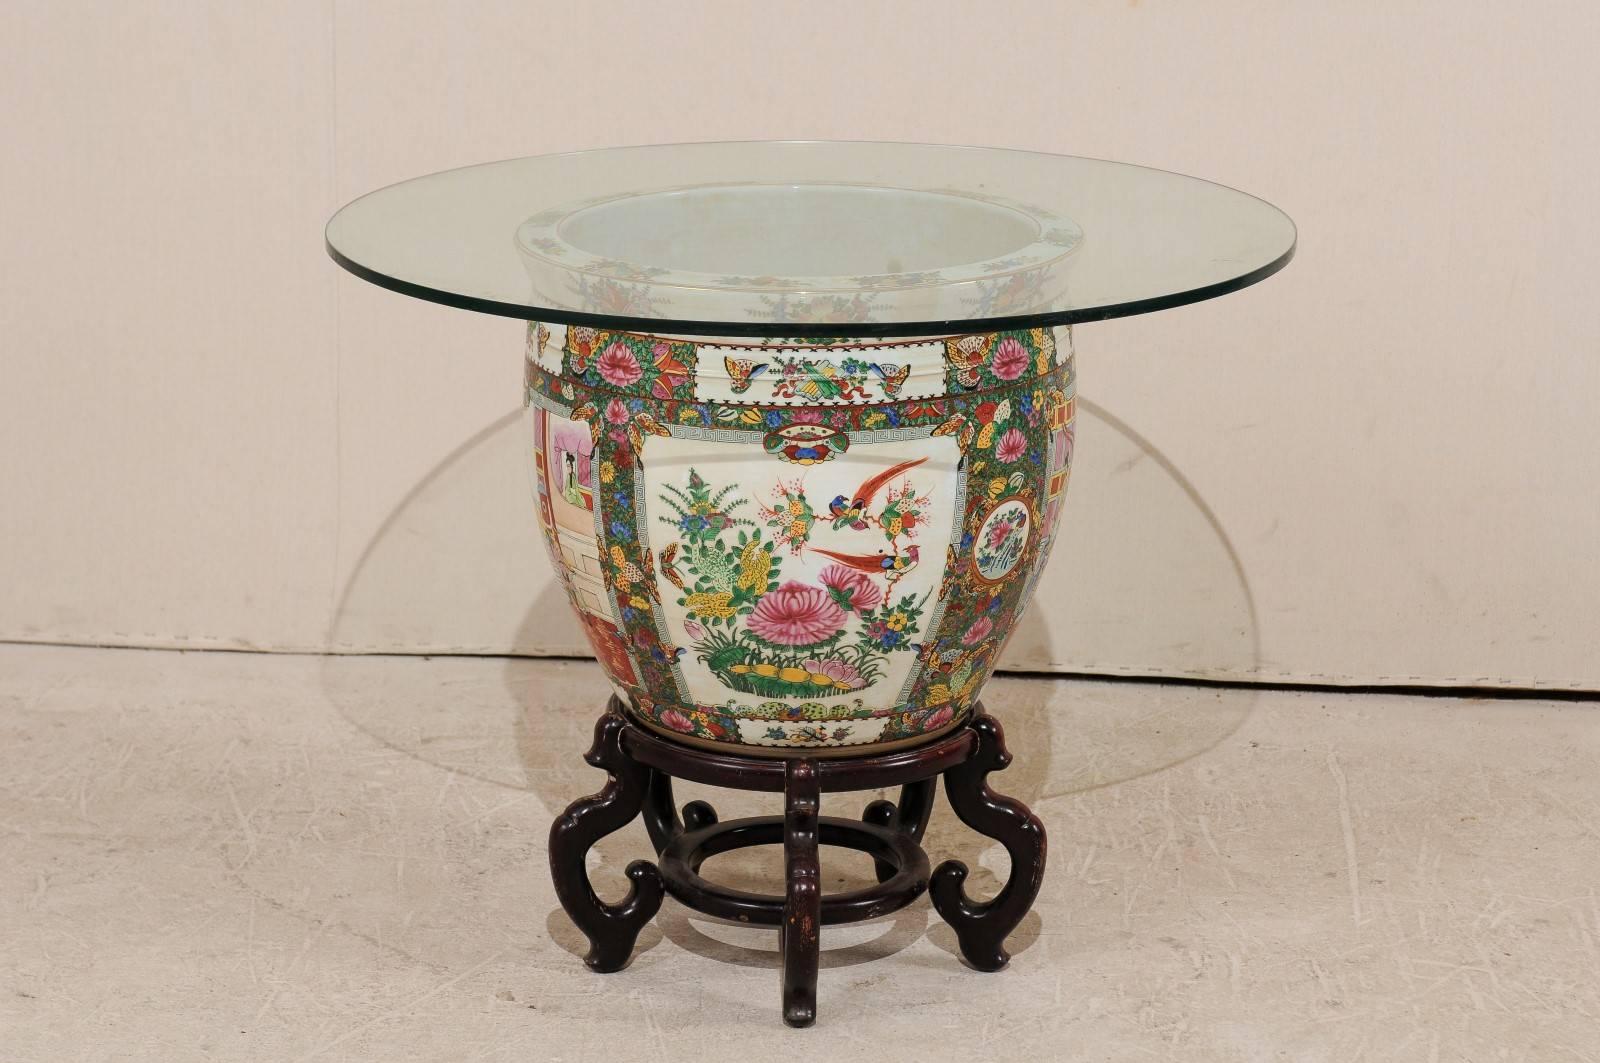 Chinese Famille Rose Ornately Decorated Porcelain, Glass and Wood Round Table In Good Condition For Sale In Atlanta, GA